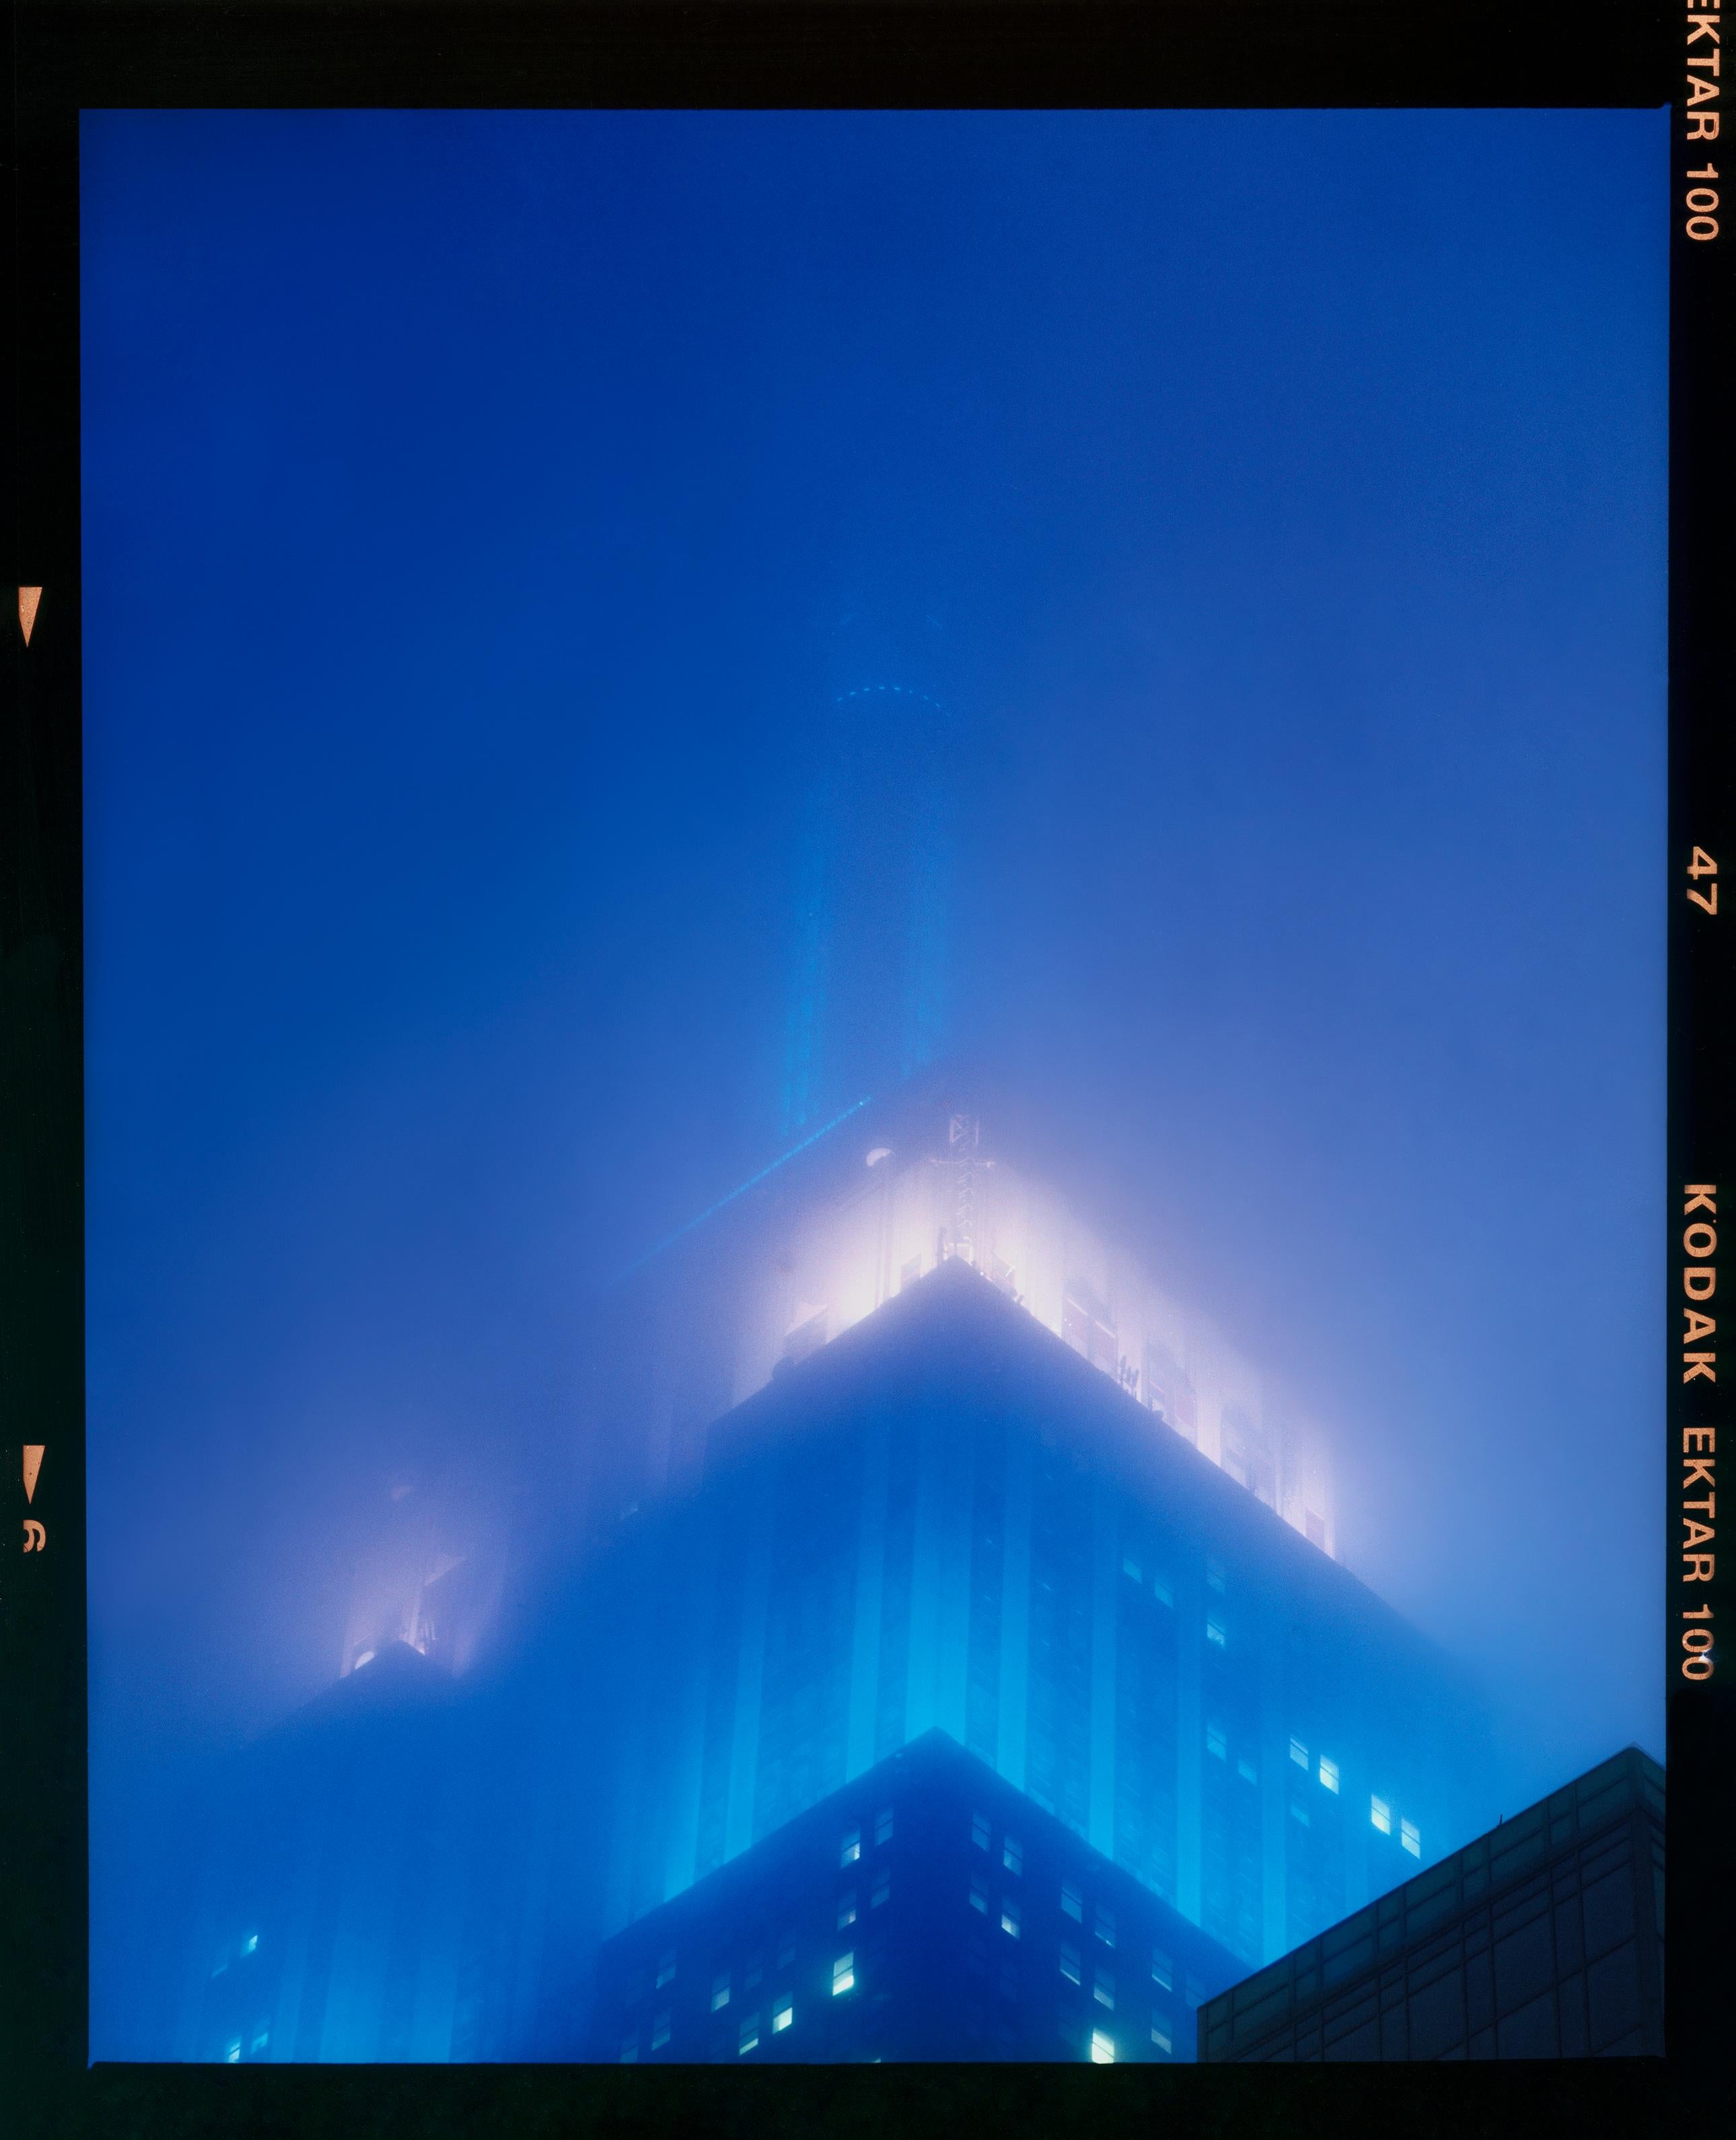 Richard Heeps Print - NOMAD II (Film Rebate), New York - Conceptual Architectural Color Photography